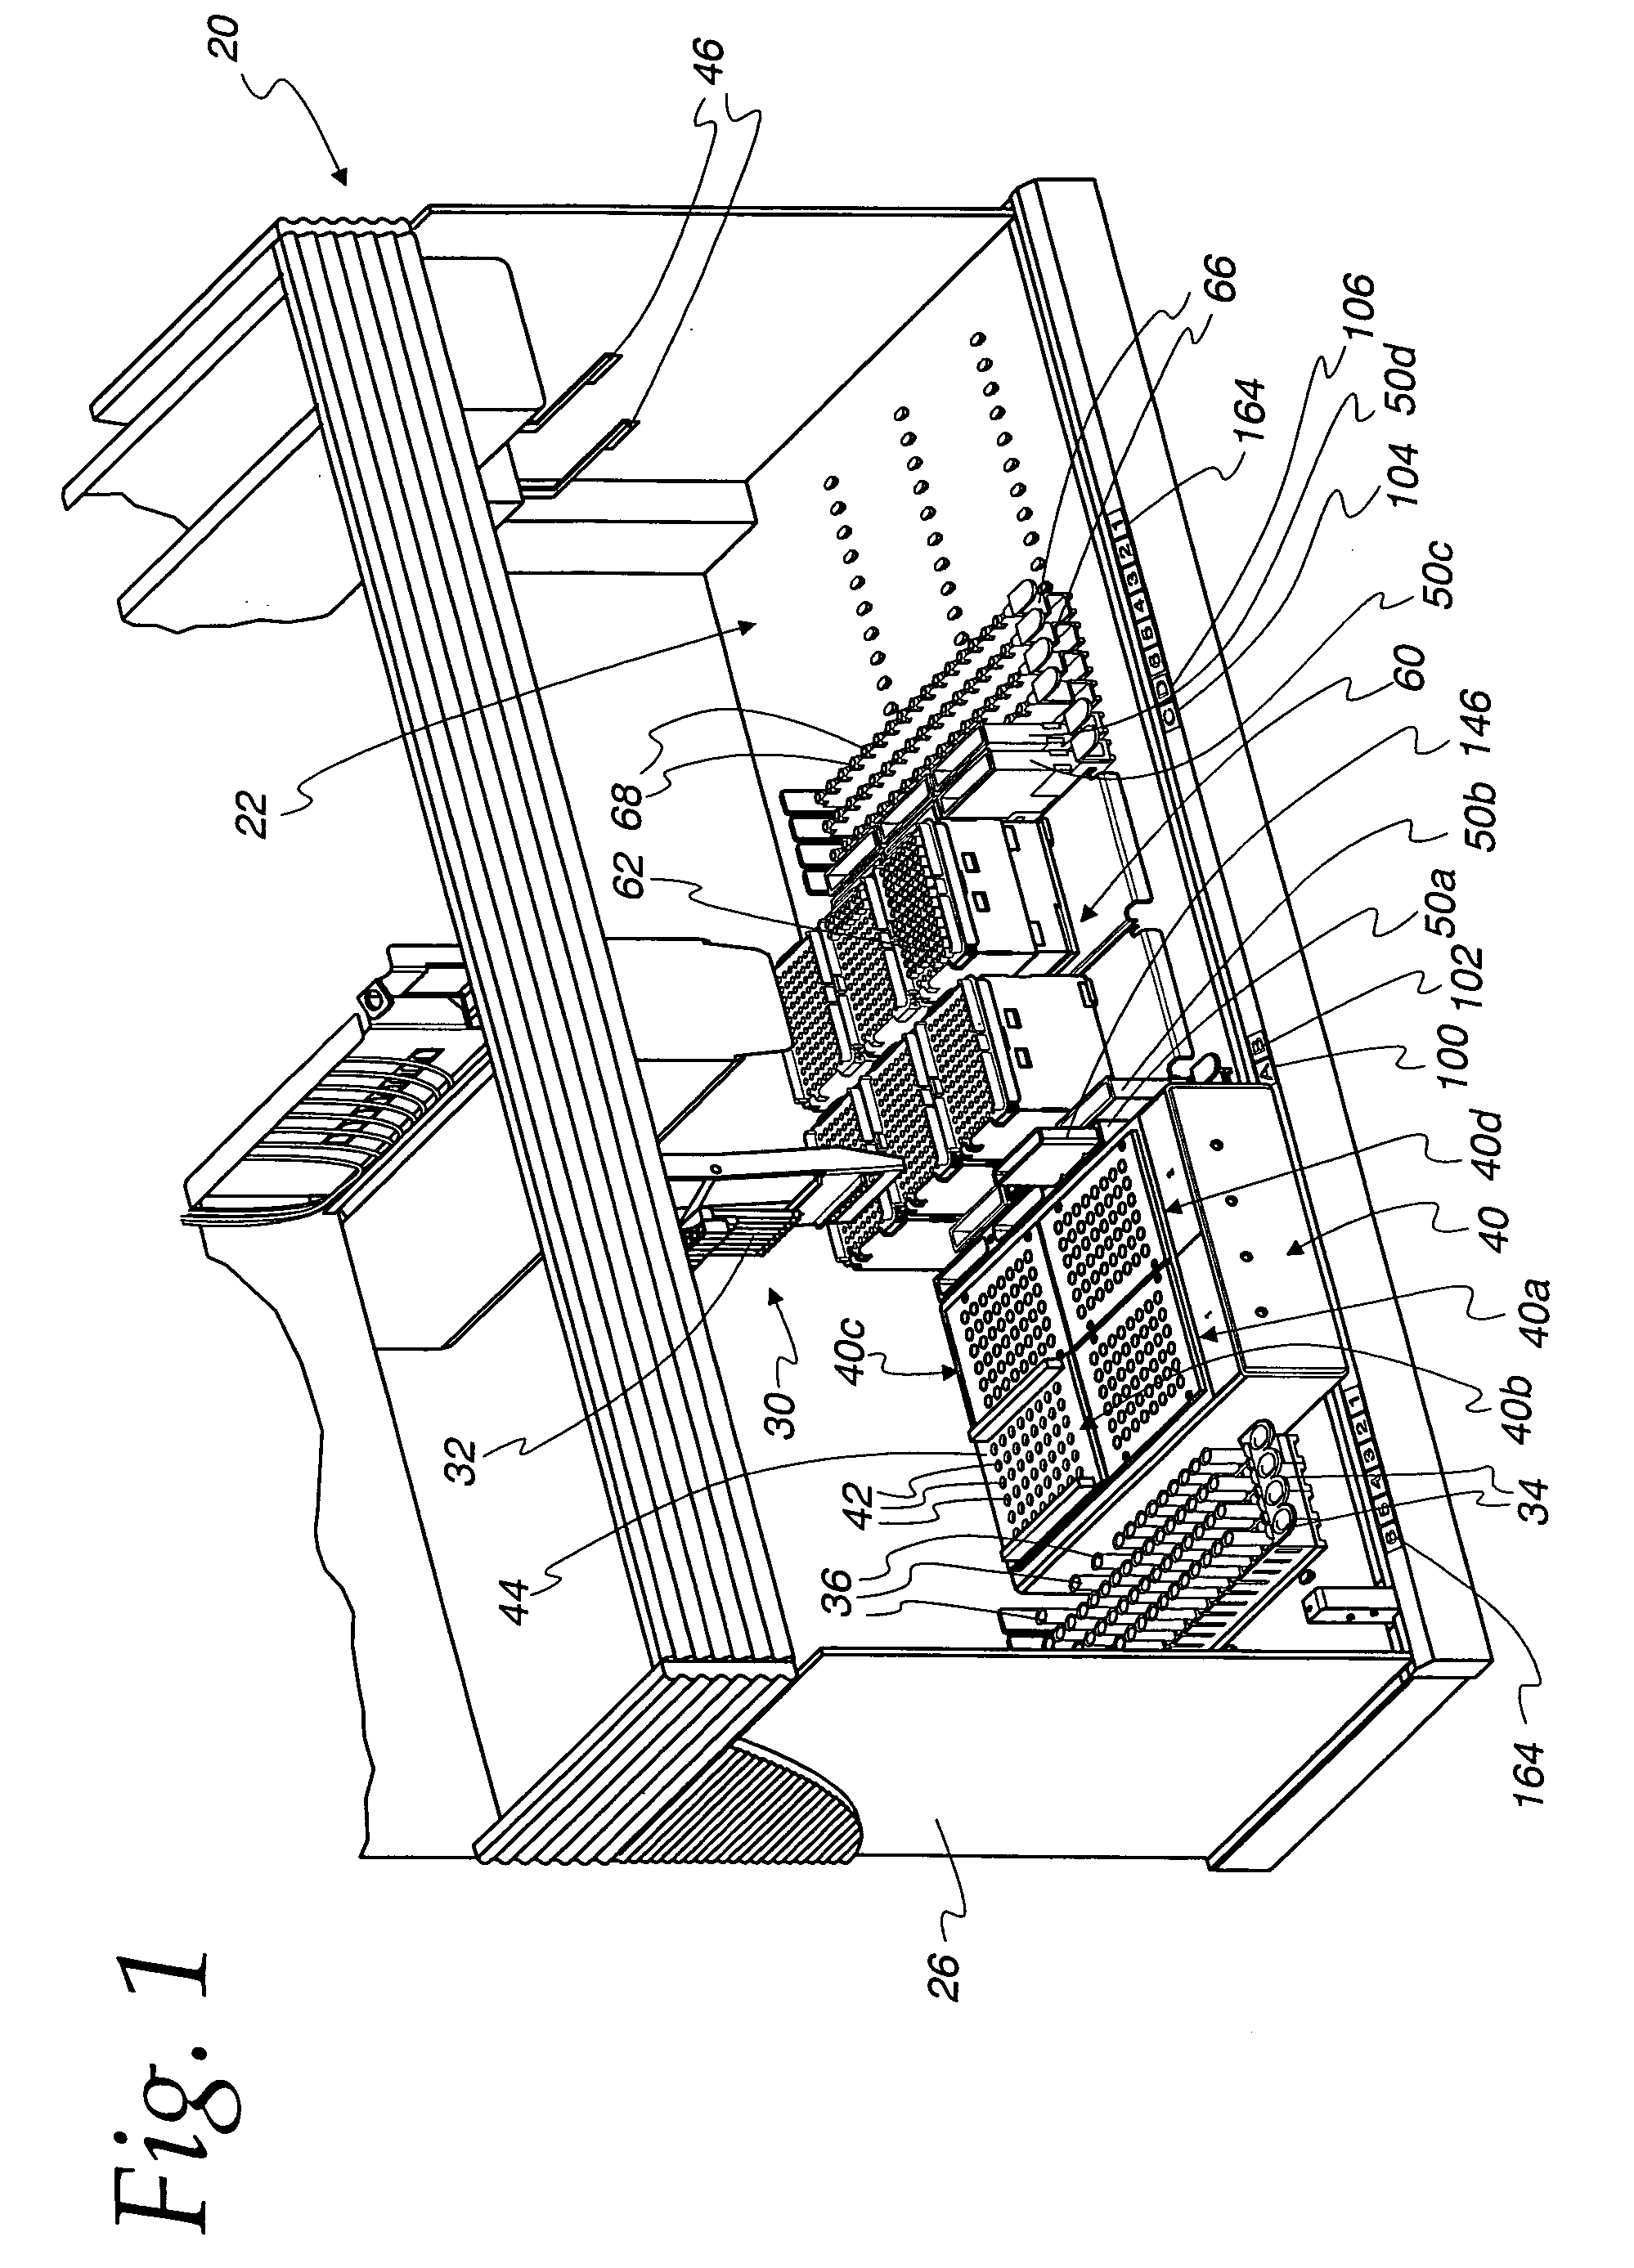 Apparatus and method for handling fluids for analysis